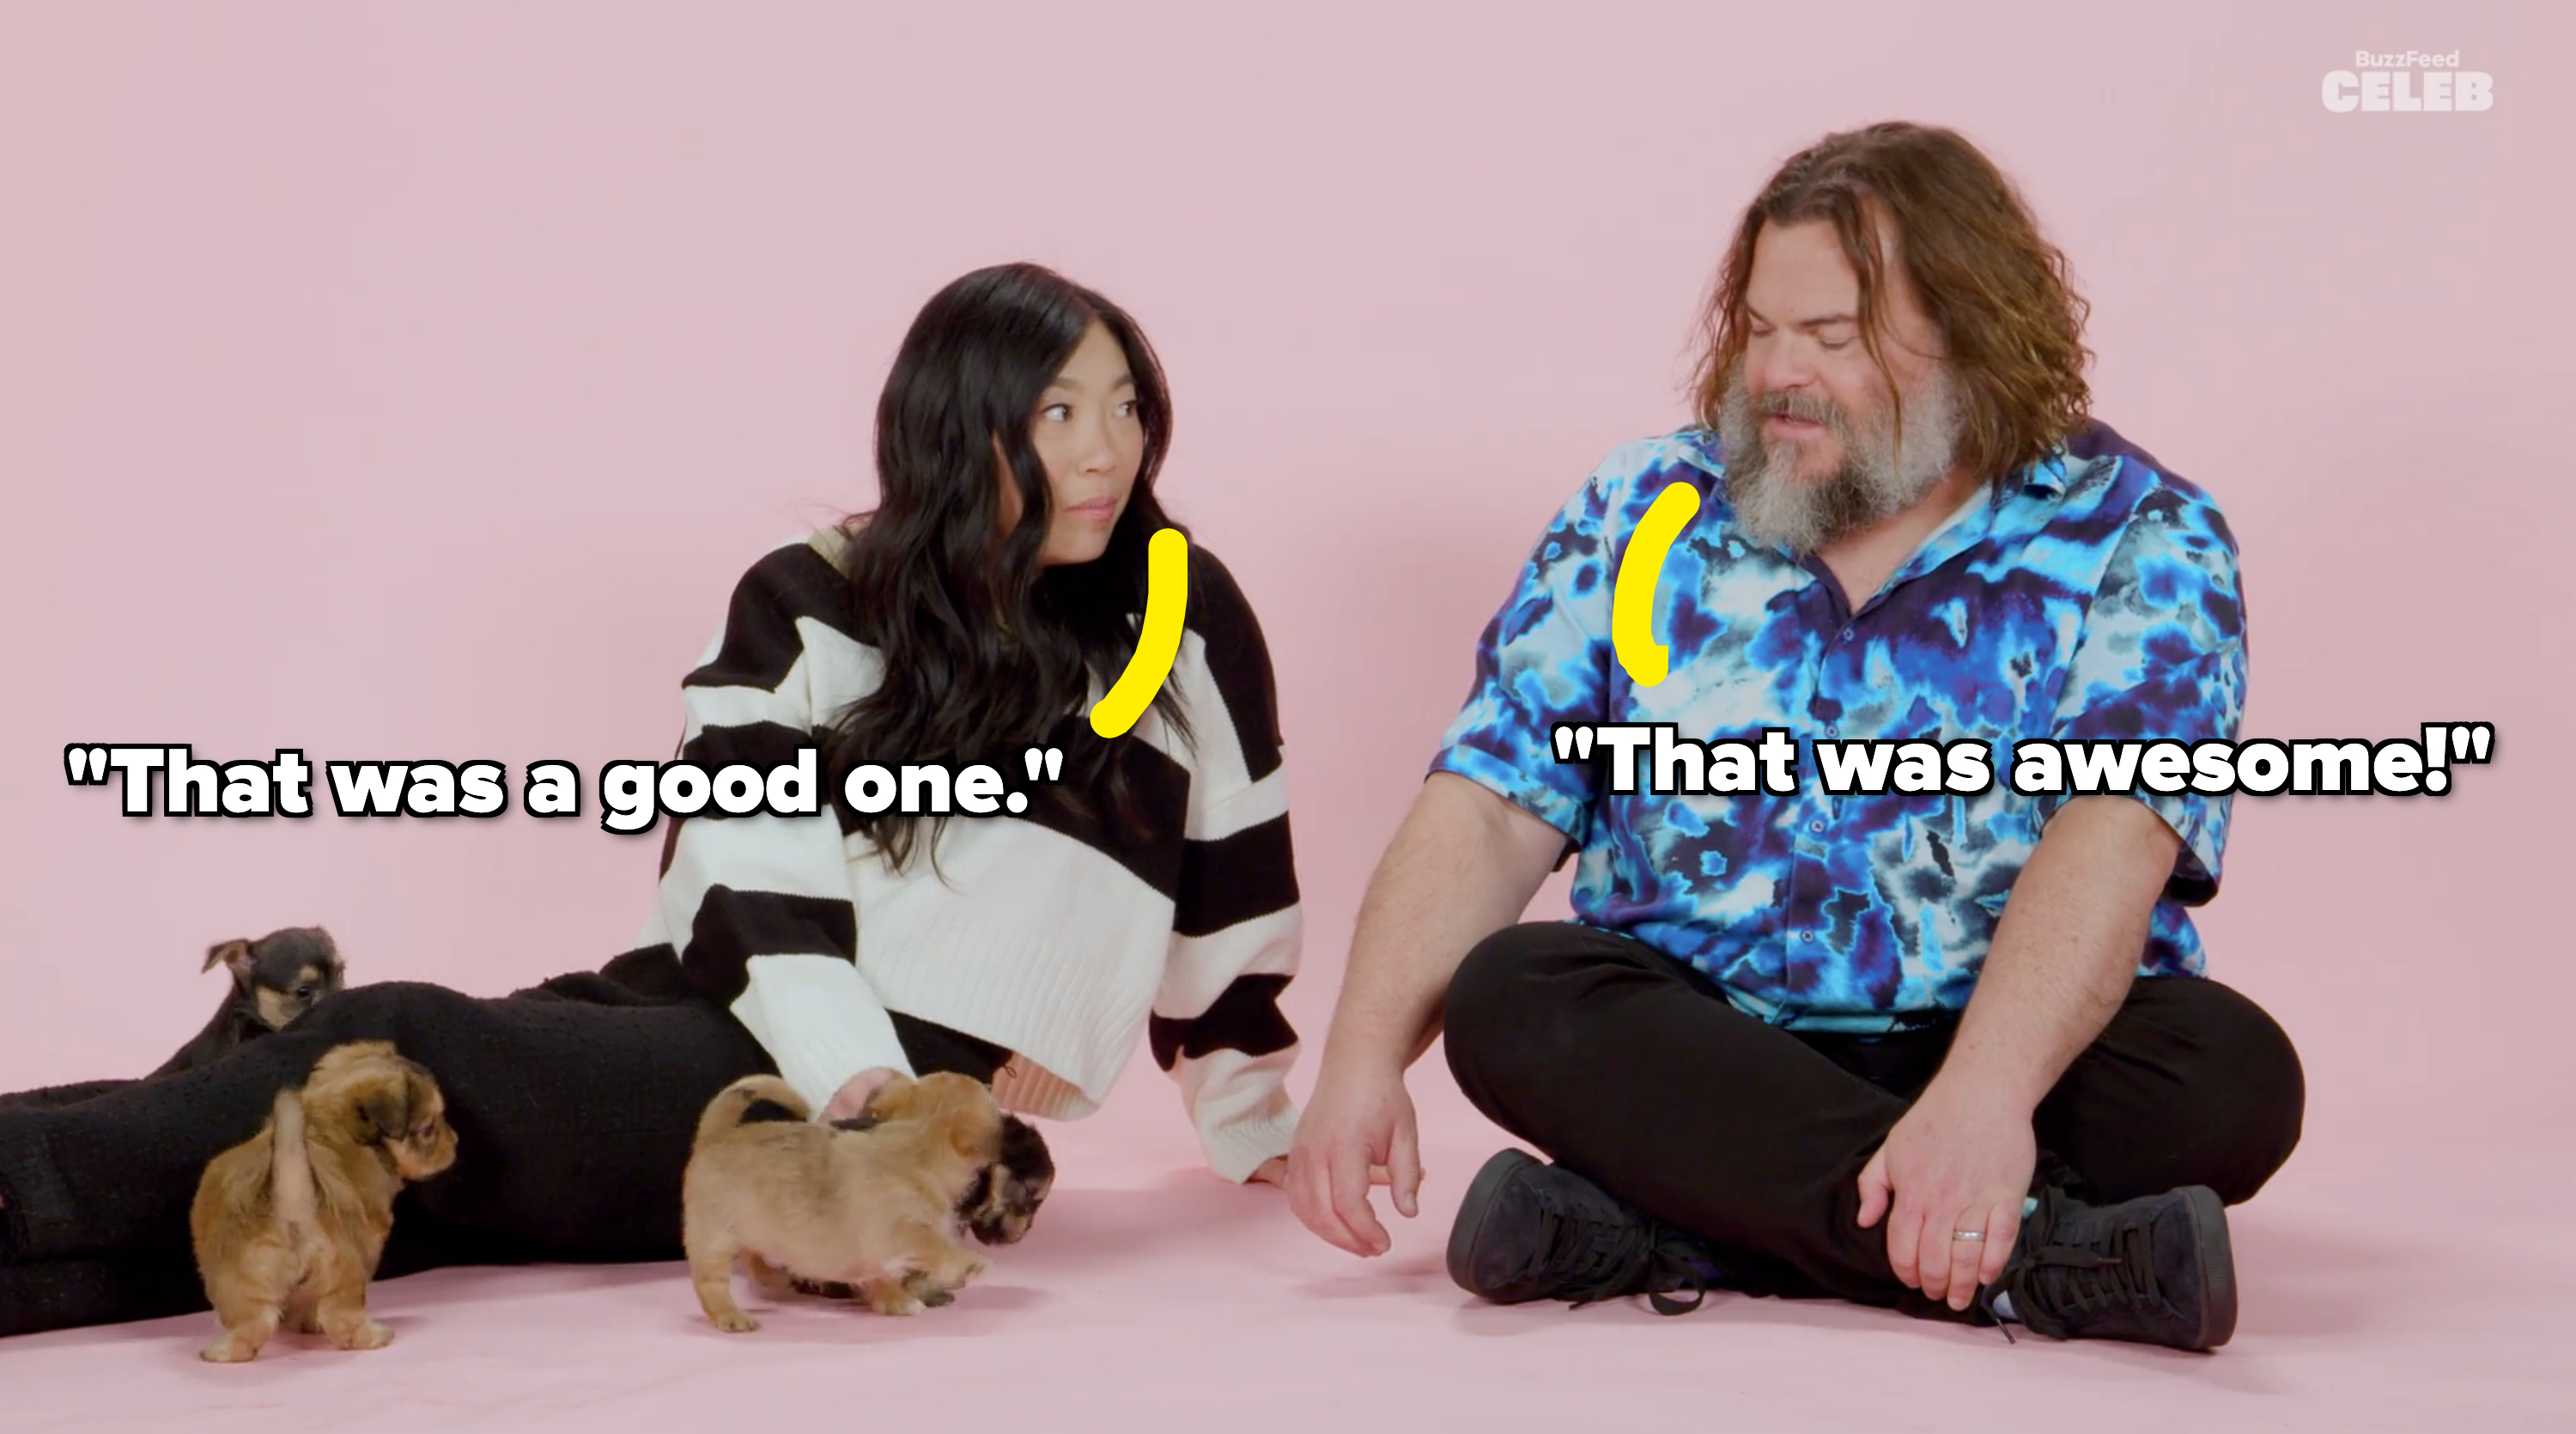 Awkwafina and Jack Black sitting on the floor with puppies around them